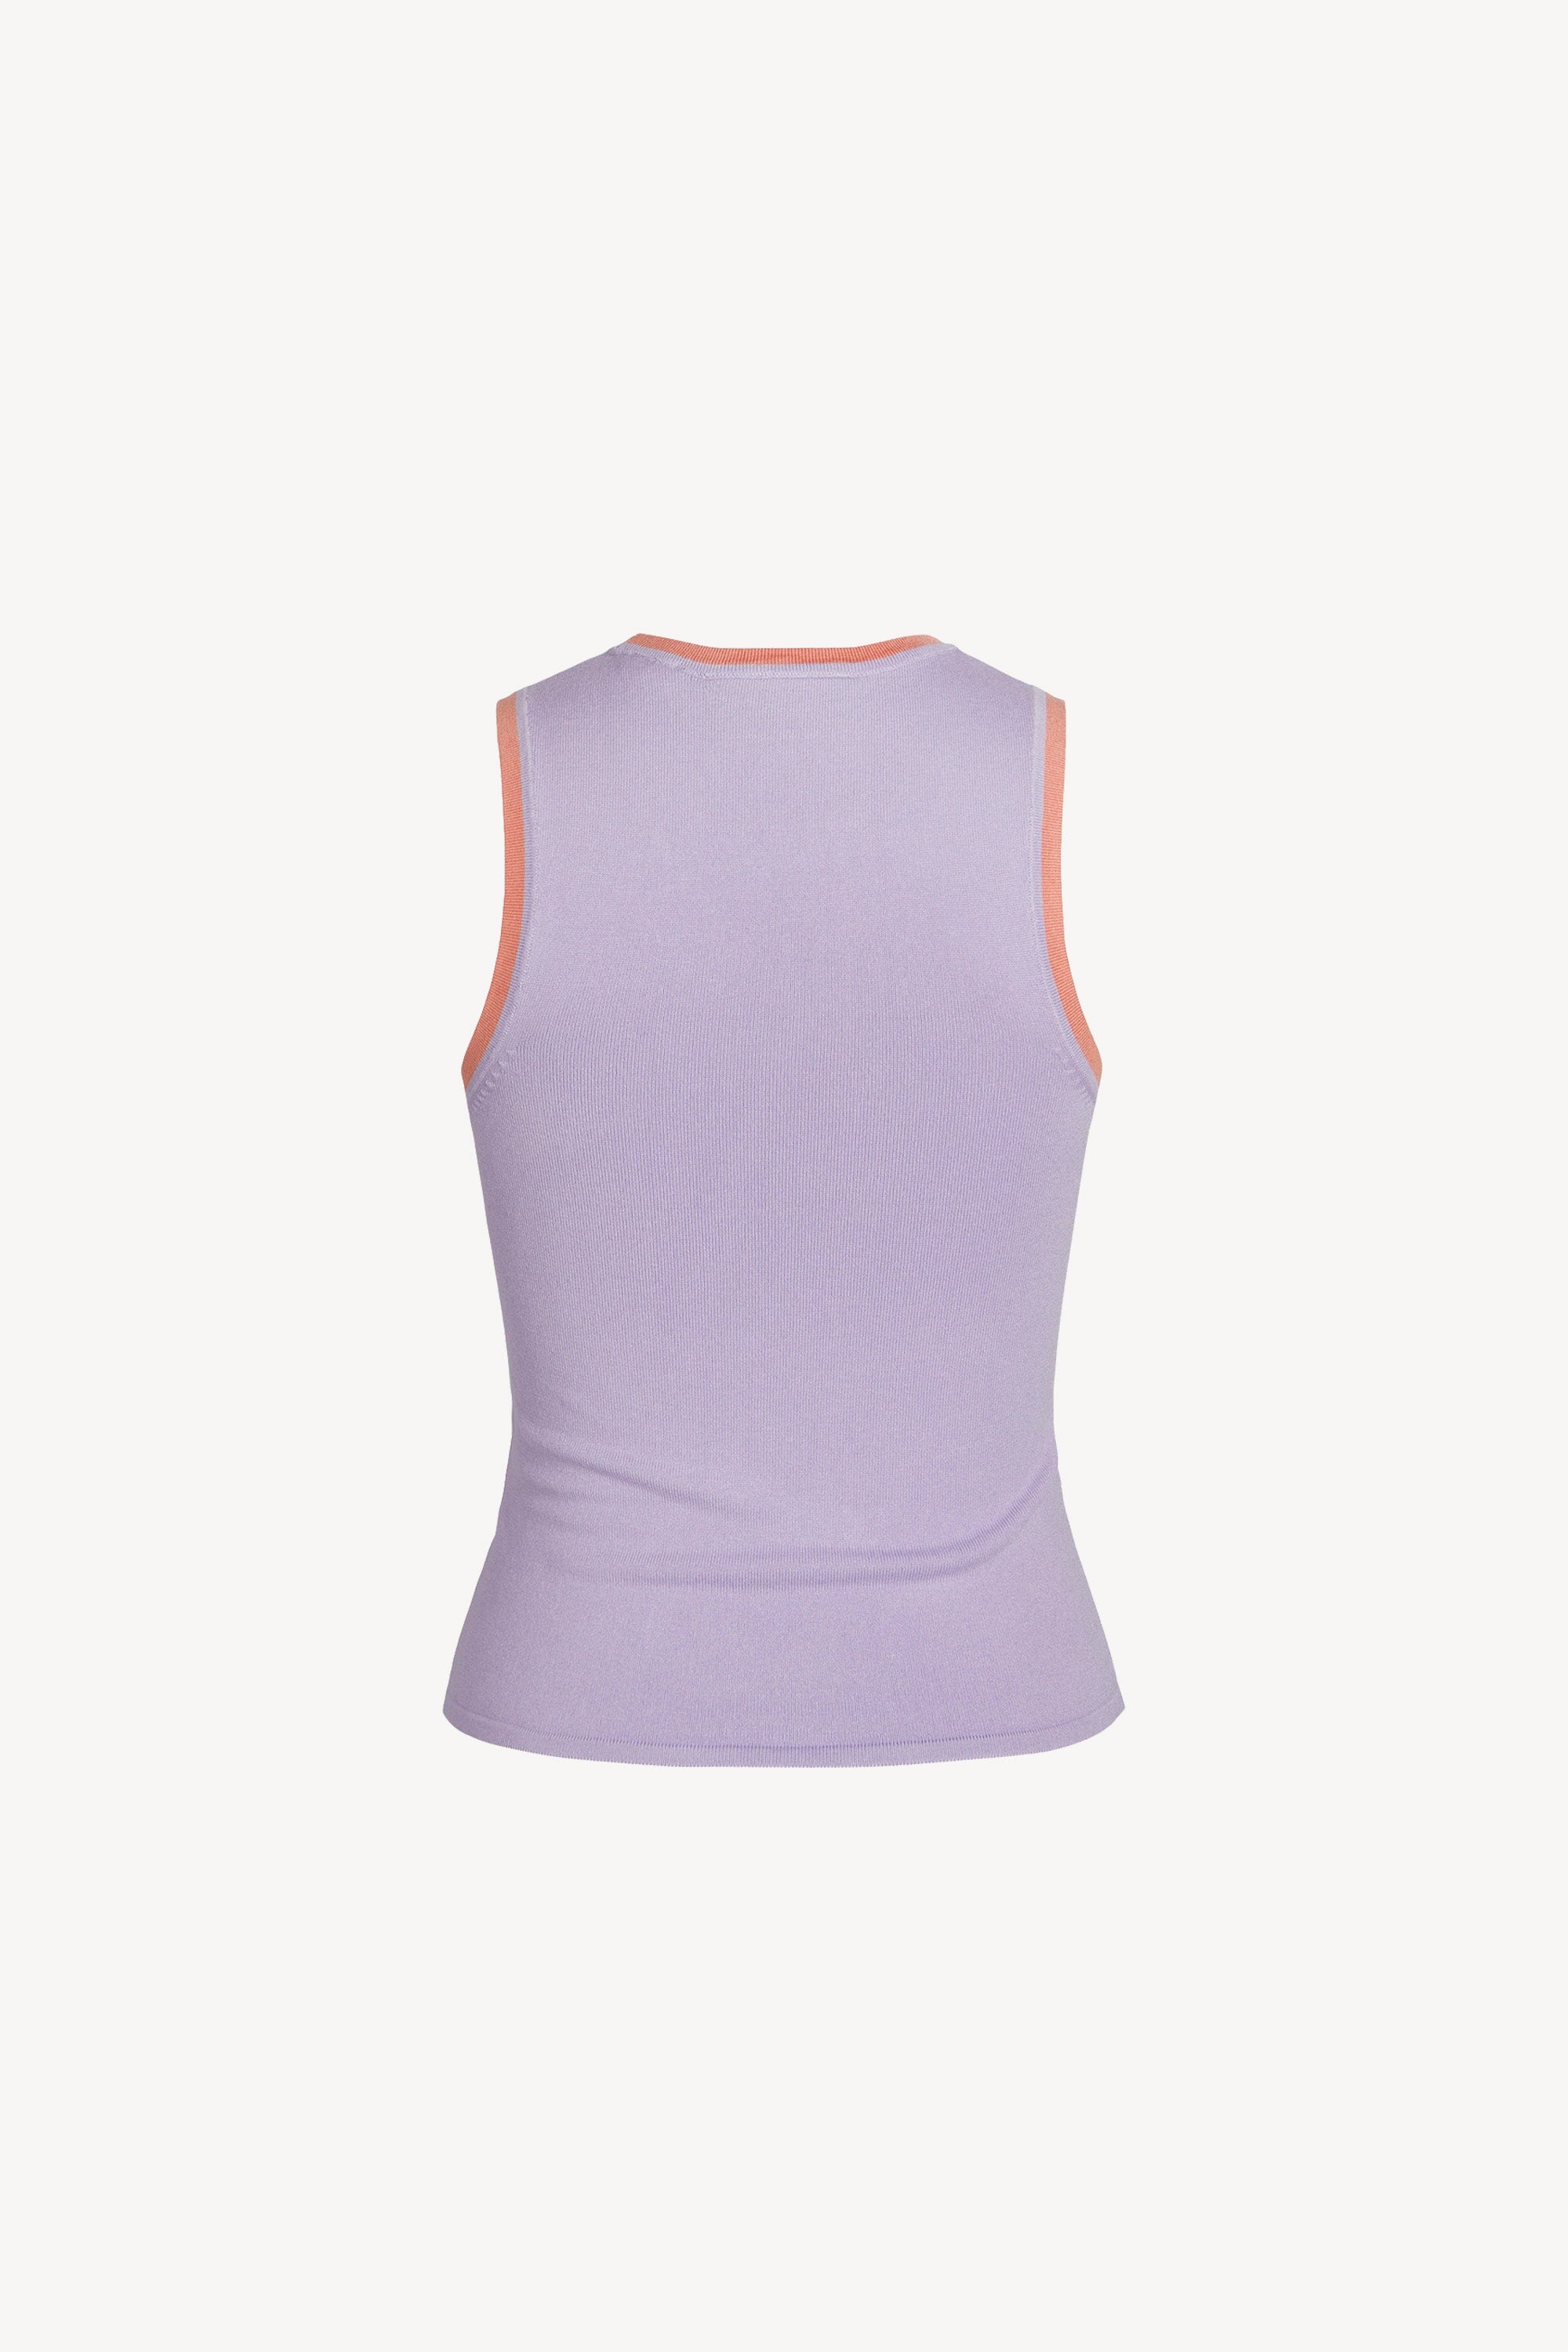 Evelyn Top Knit Lilac Breeze /Burnt Coral